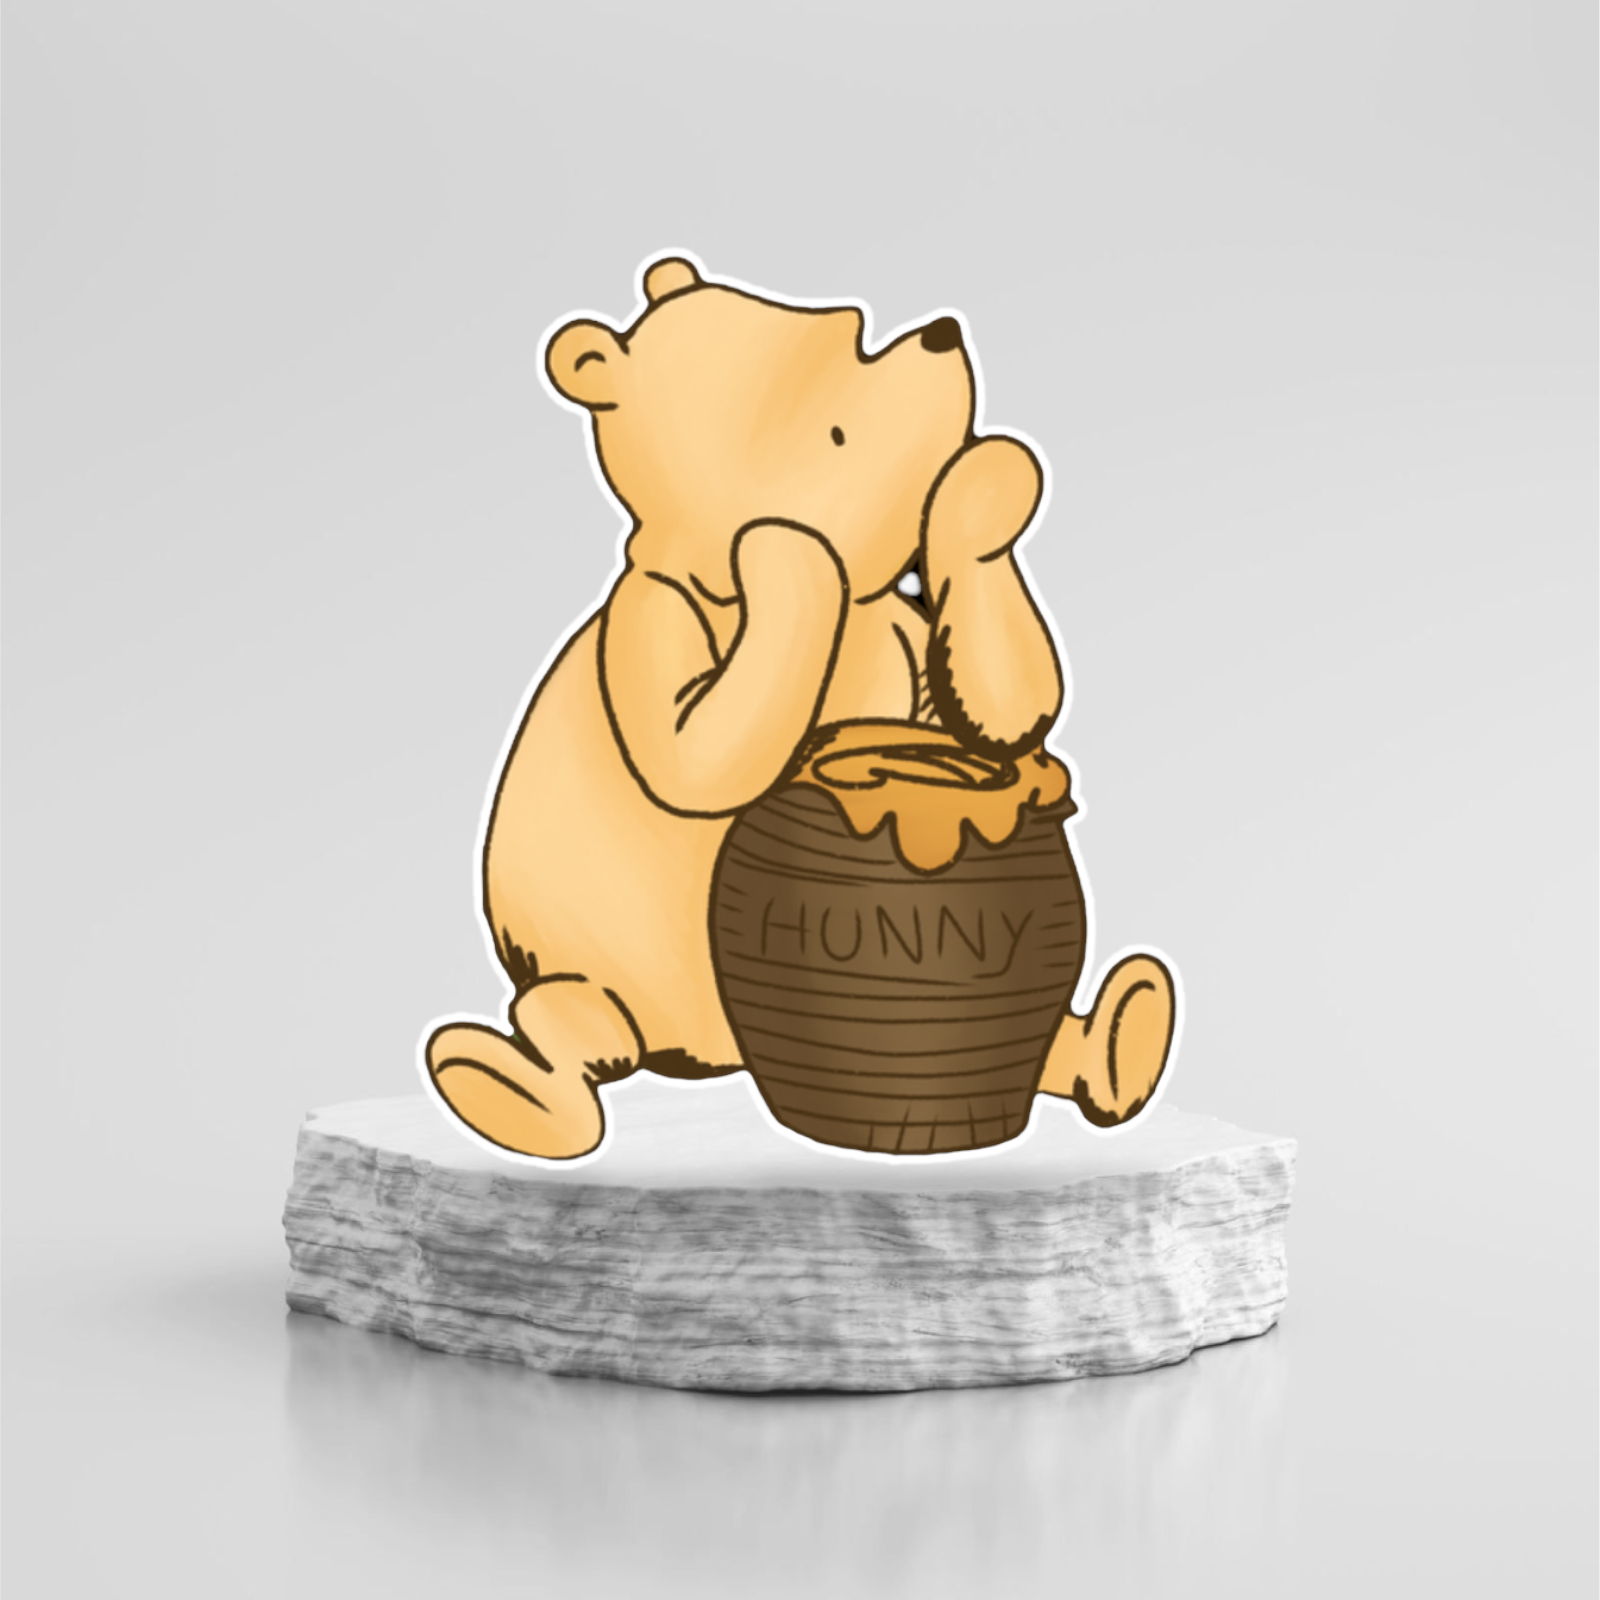 Classic Winnie the Pooh Birthday Character Cutouts, Centerpieces, Backdrop,  cupcakes topper, cake toppers and party supplies. – DN Decorlance By:  DarNil Dynasty LLC